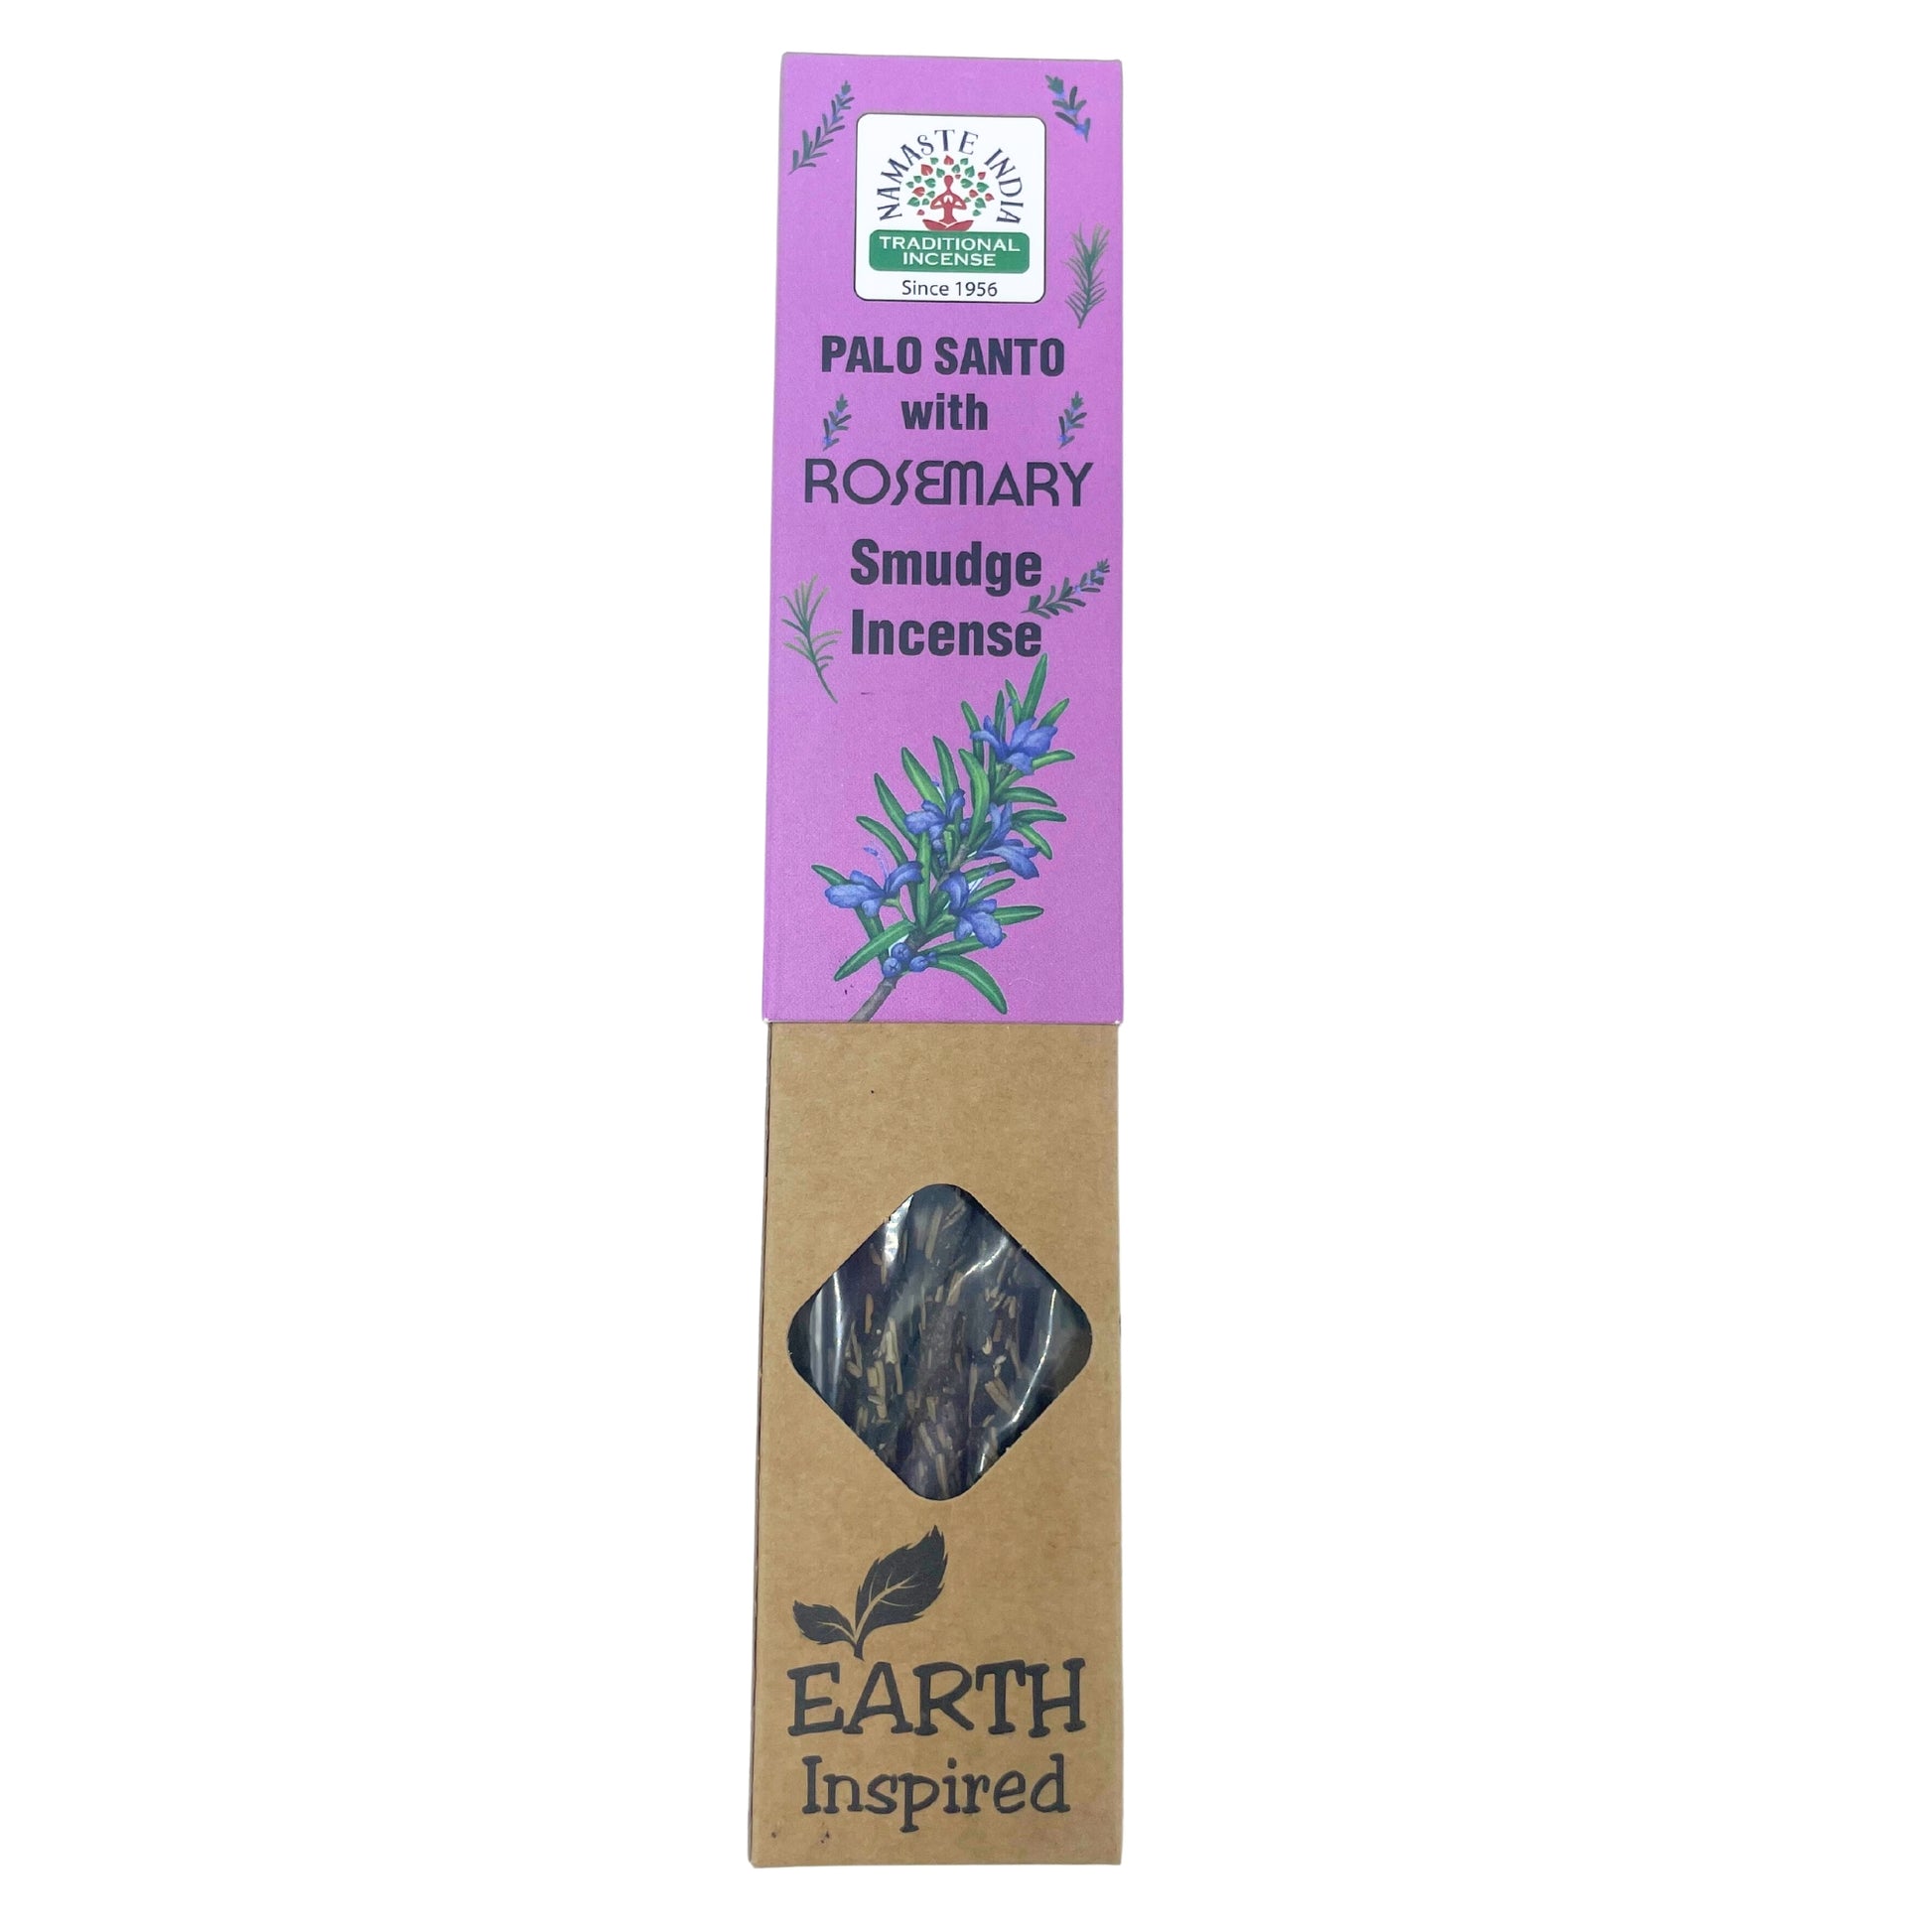 Earth Inspired Smudge Incense - Palo Santo with Rosemary